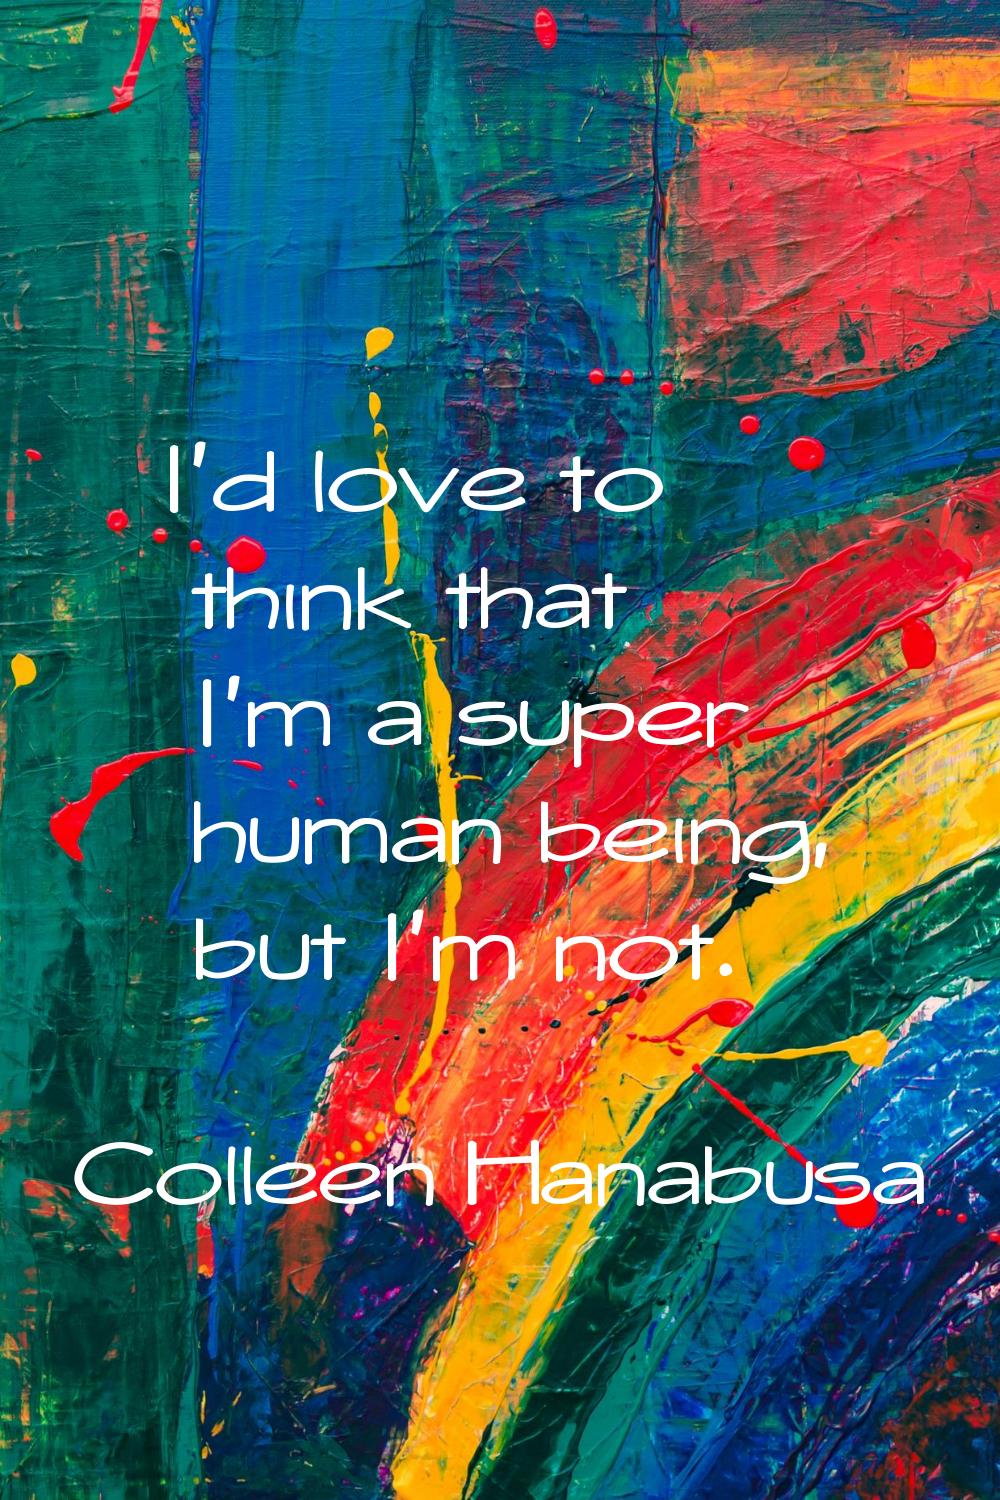 I'd love to think that I'm a super human being, but I'm not.